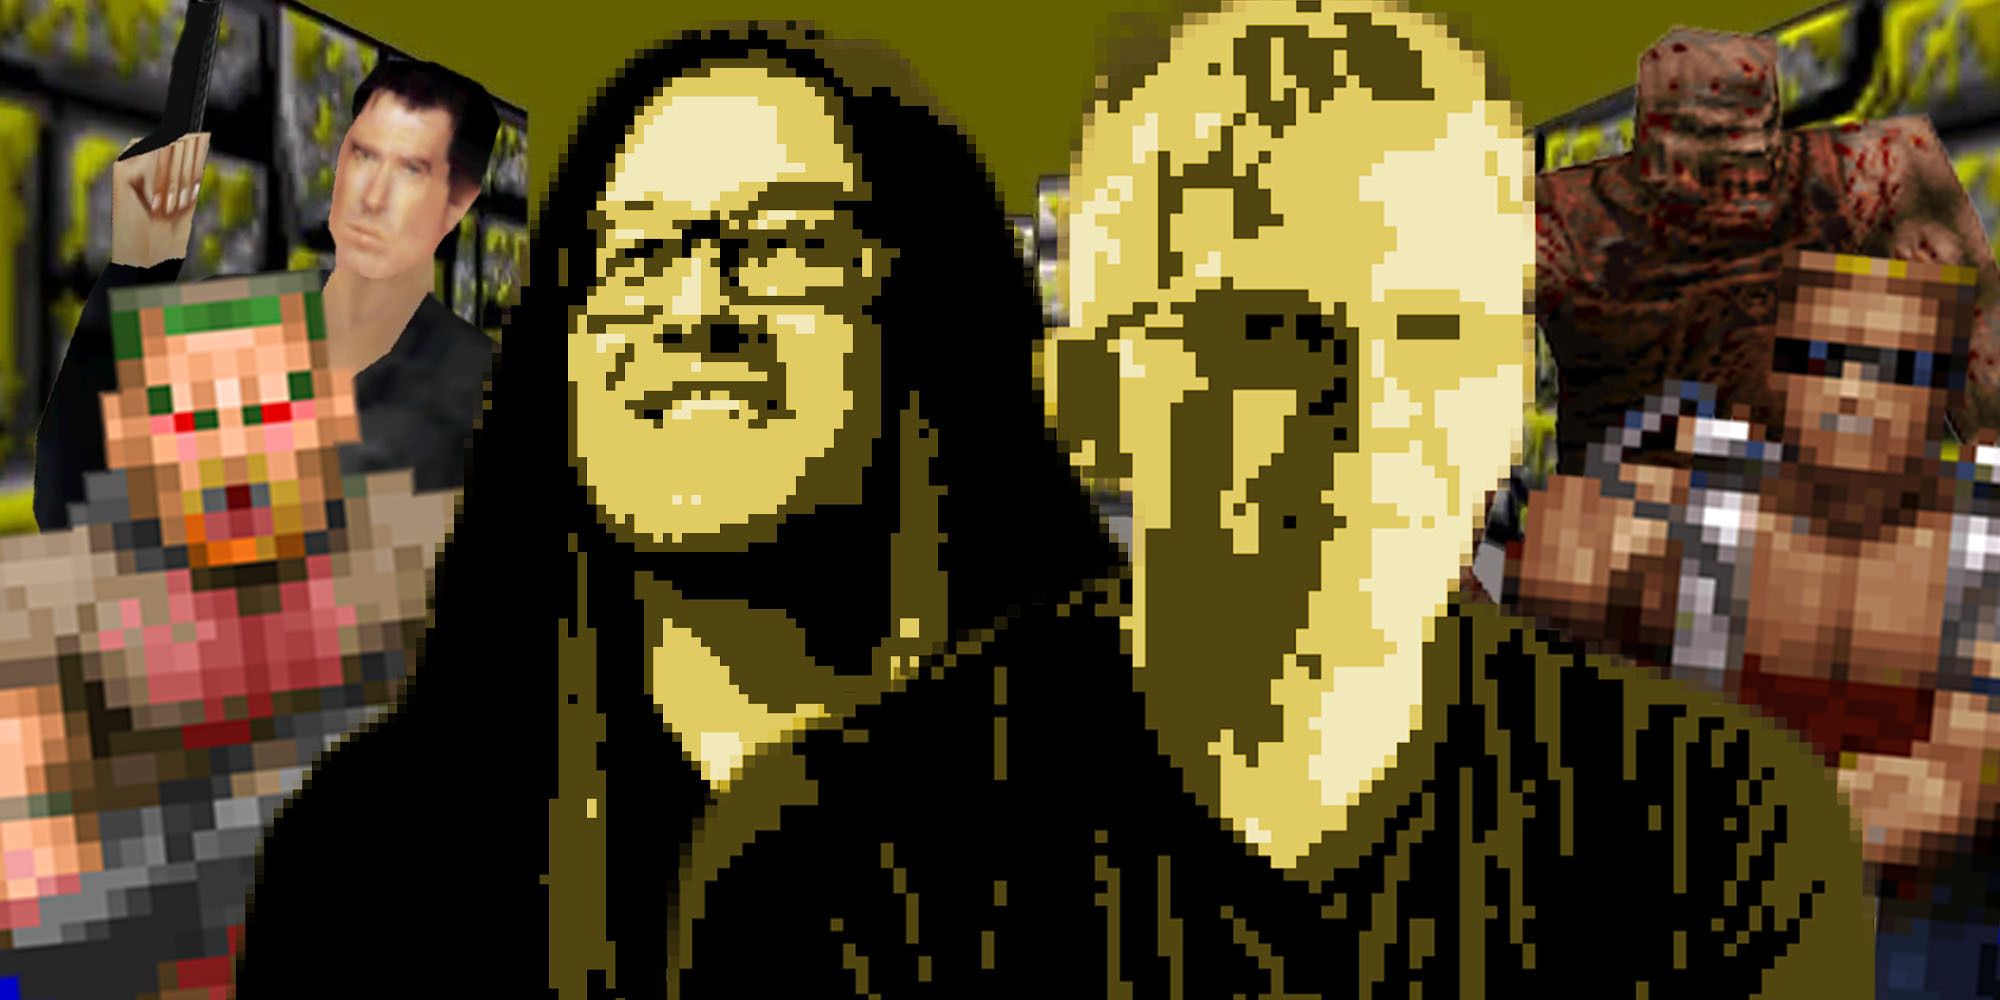 Pixellated John Romero and John Carmack surrounded by characters from 90s shooters